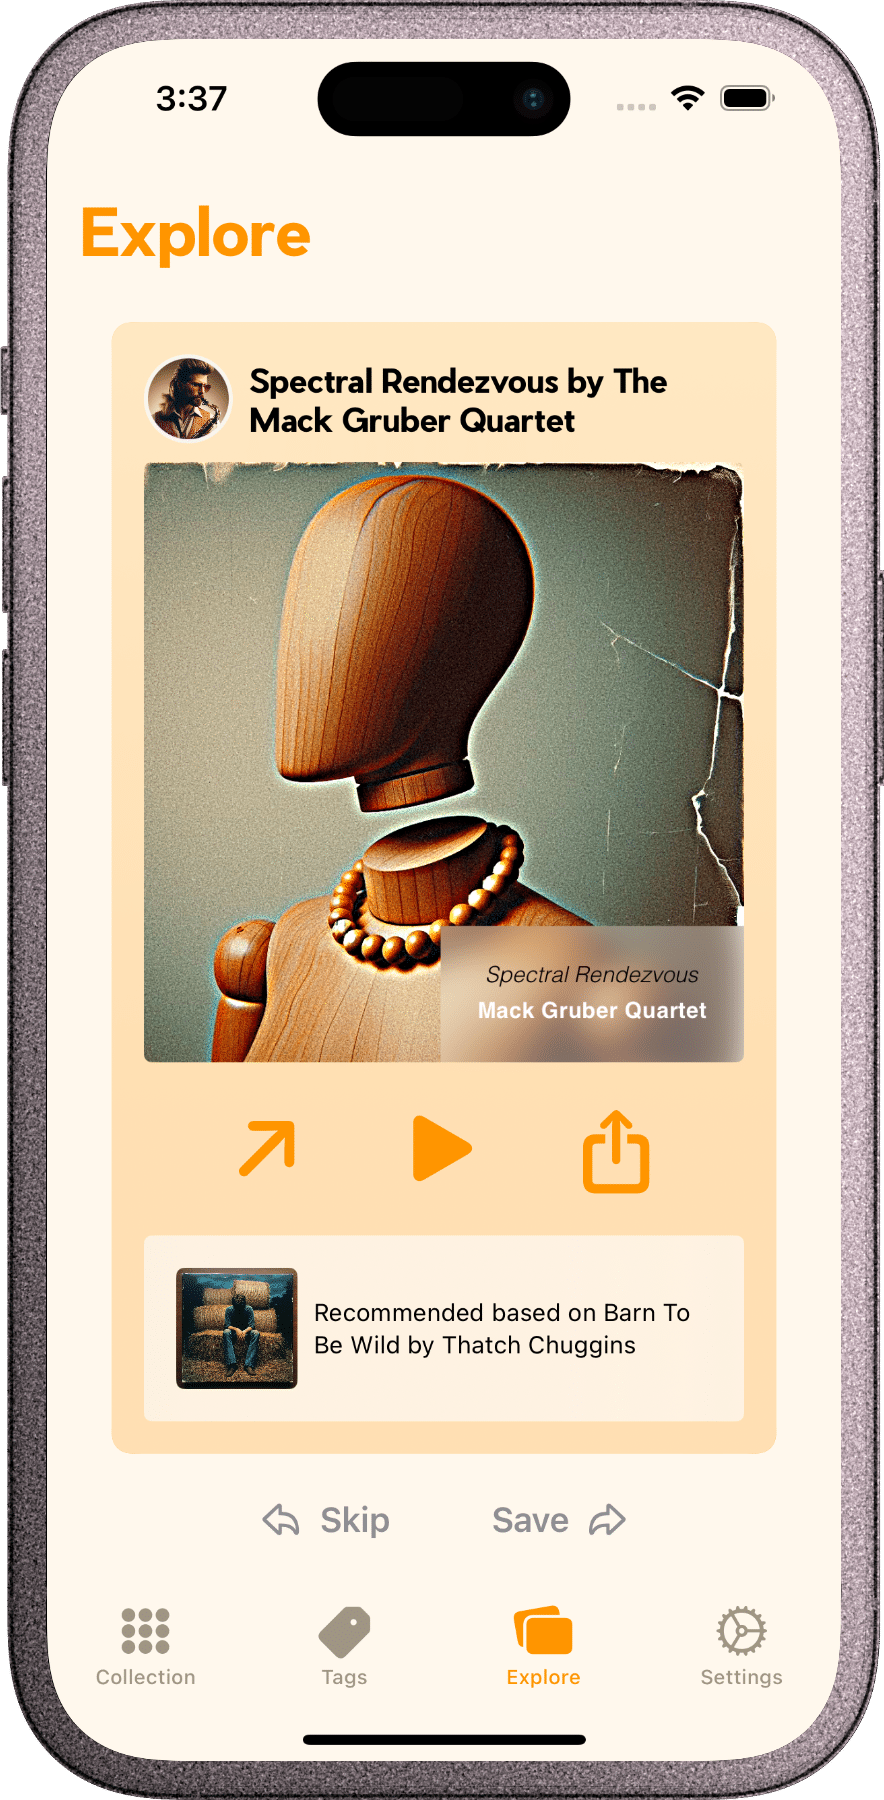 A screenshot of In Rotation's music recommendation interface